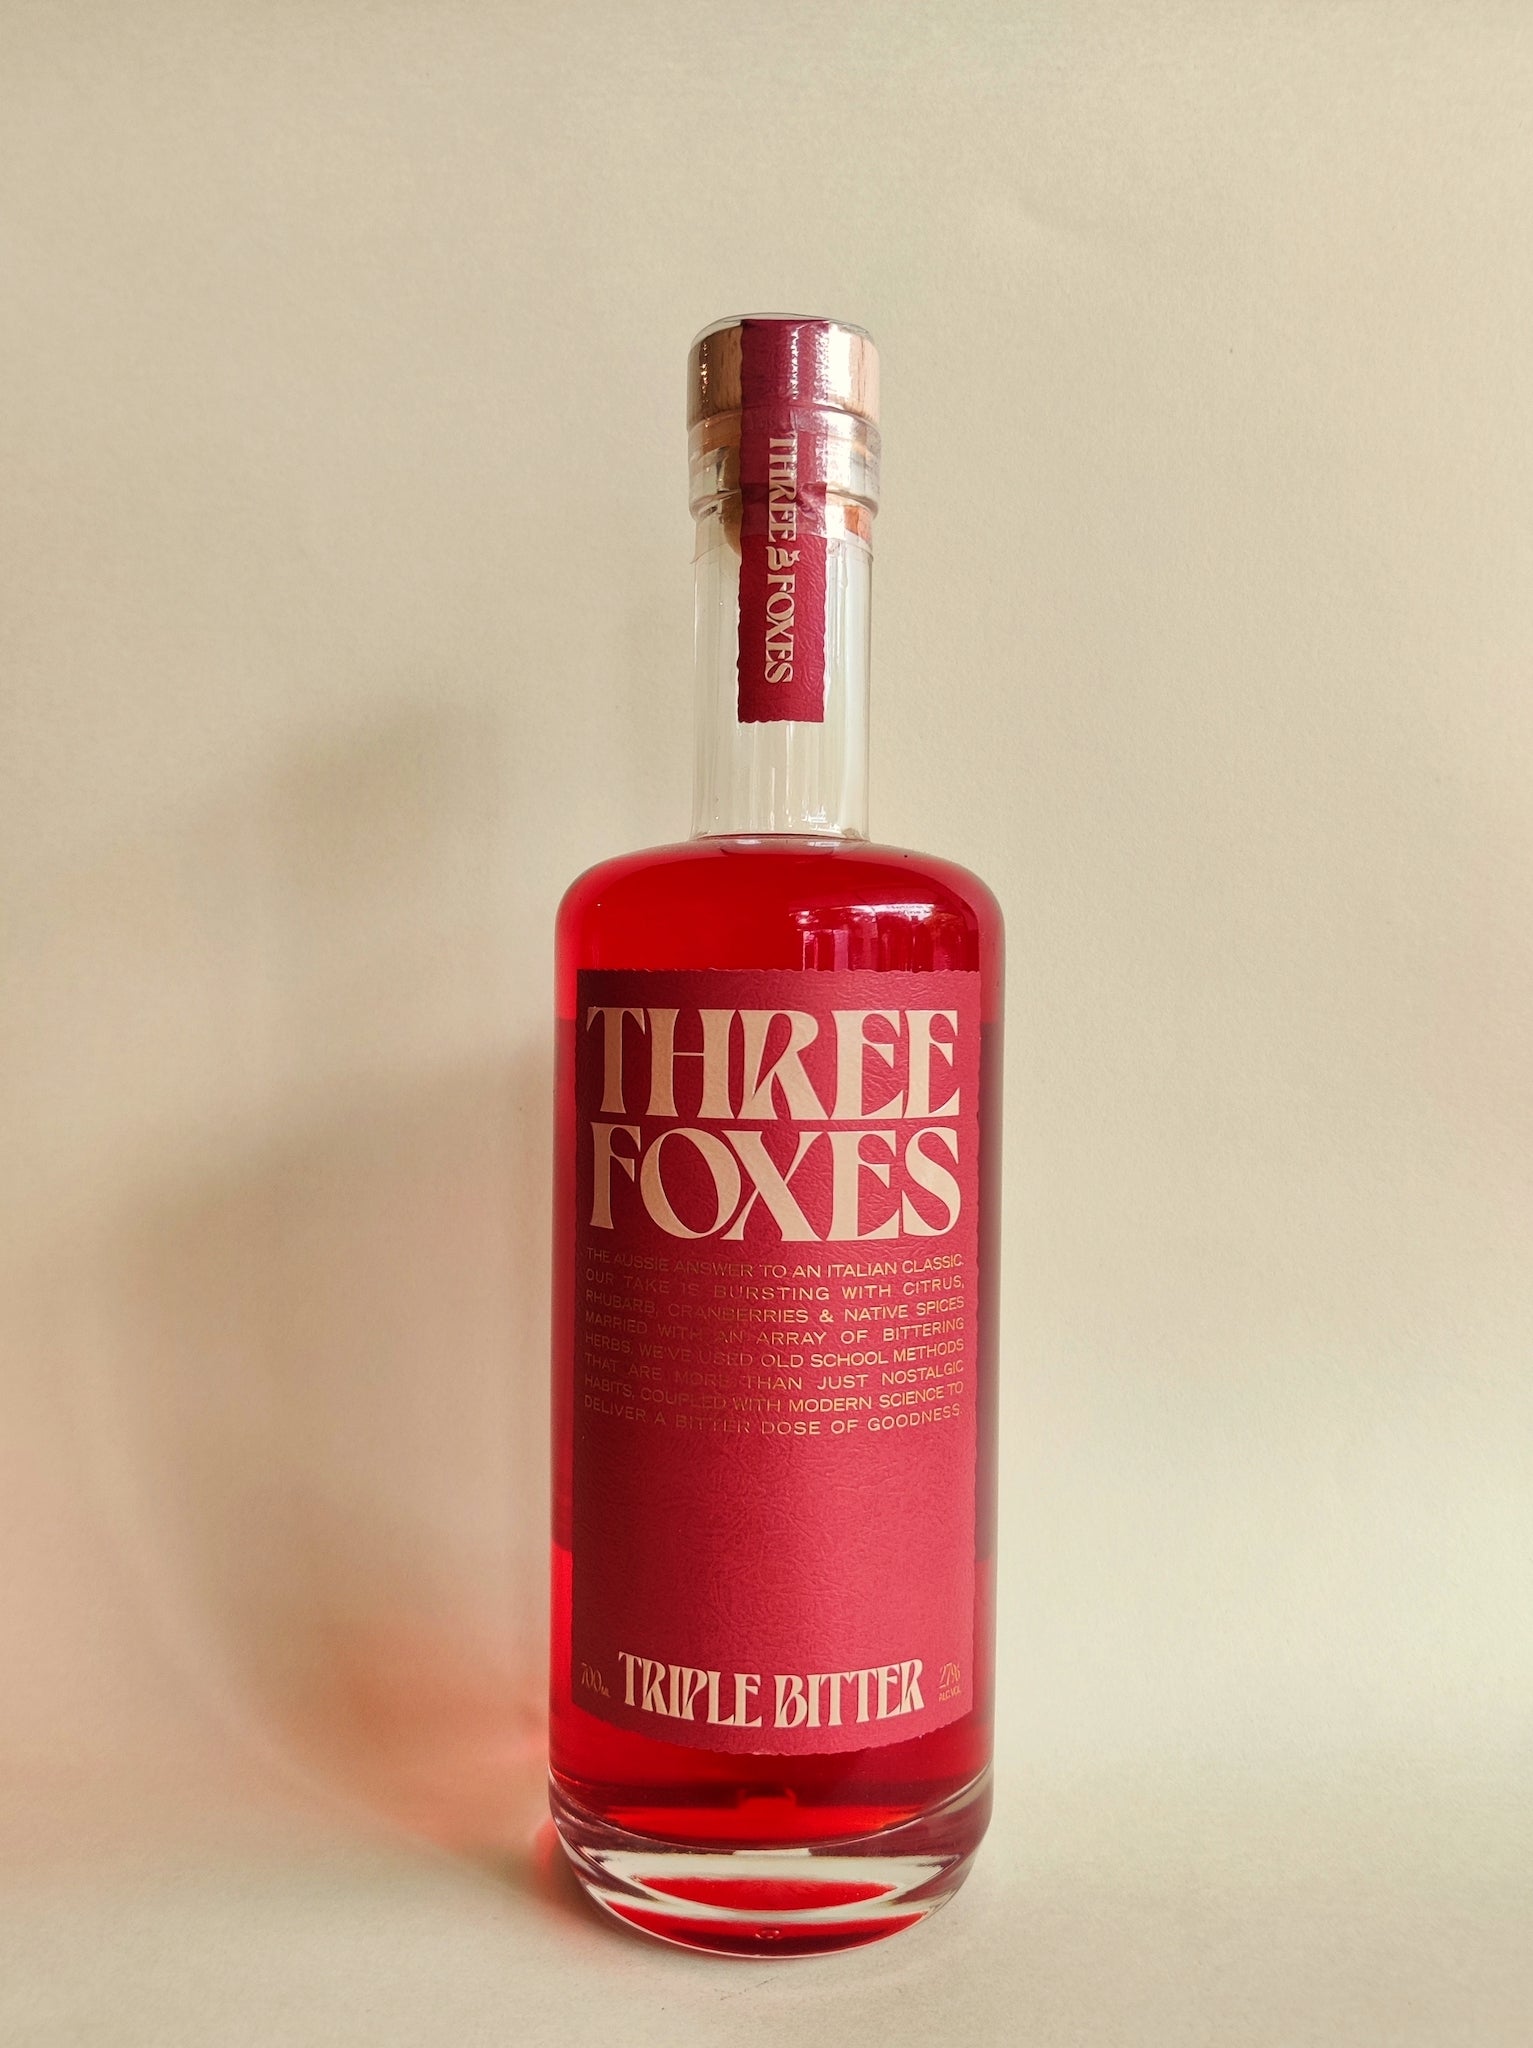 A bottle of Three Foxes Triple Bitter.